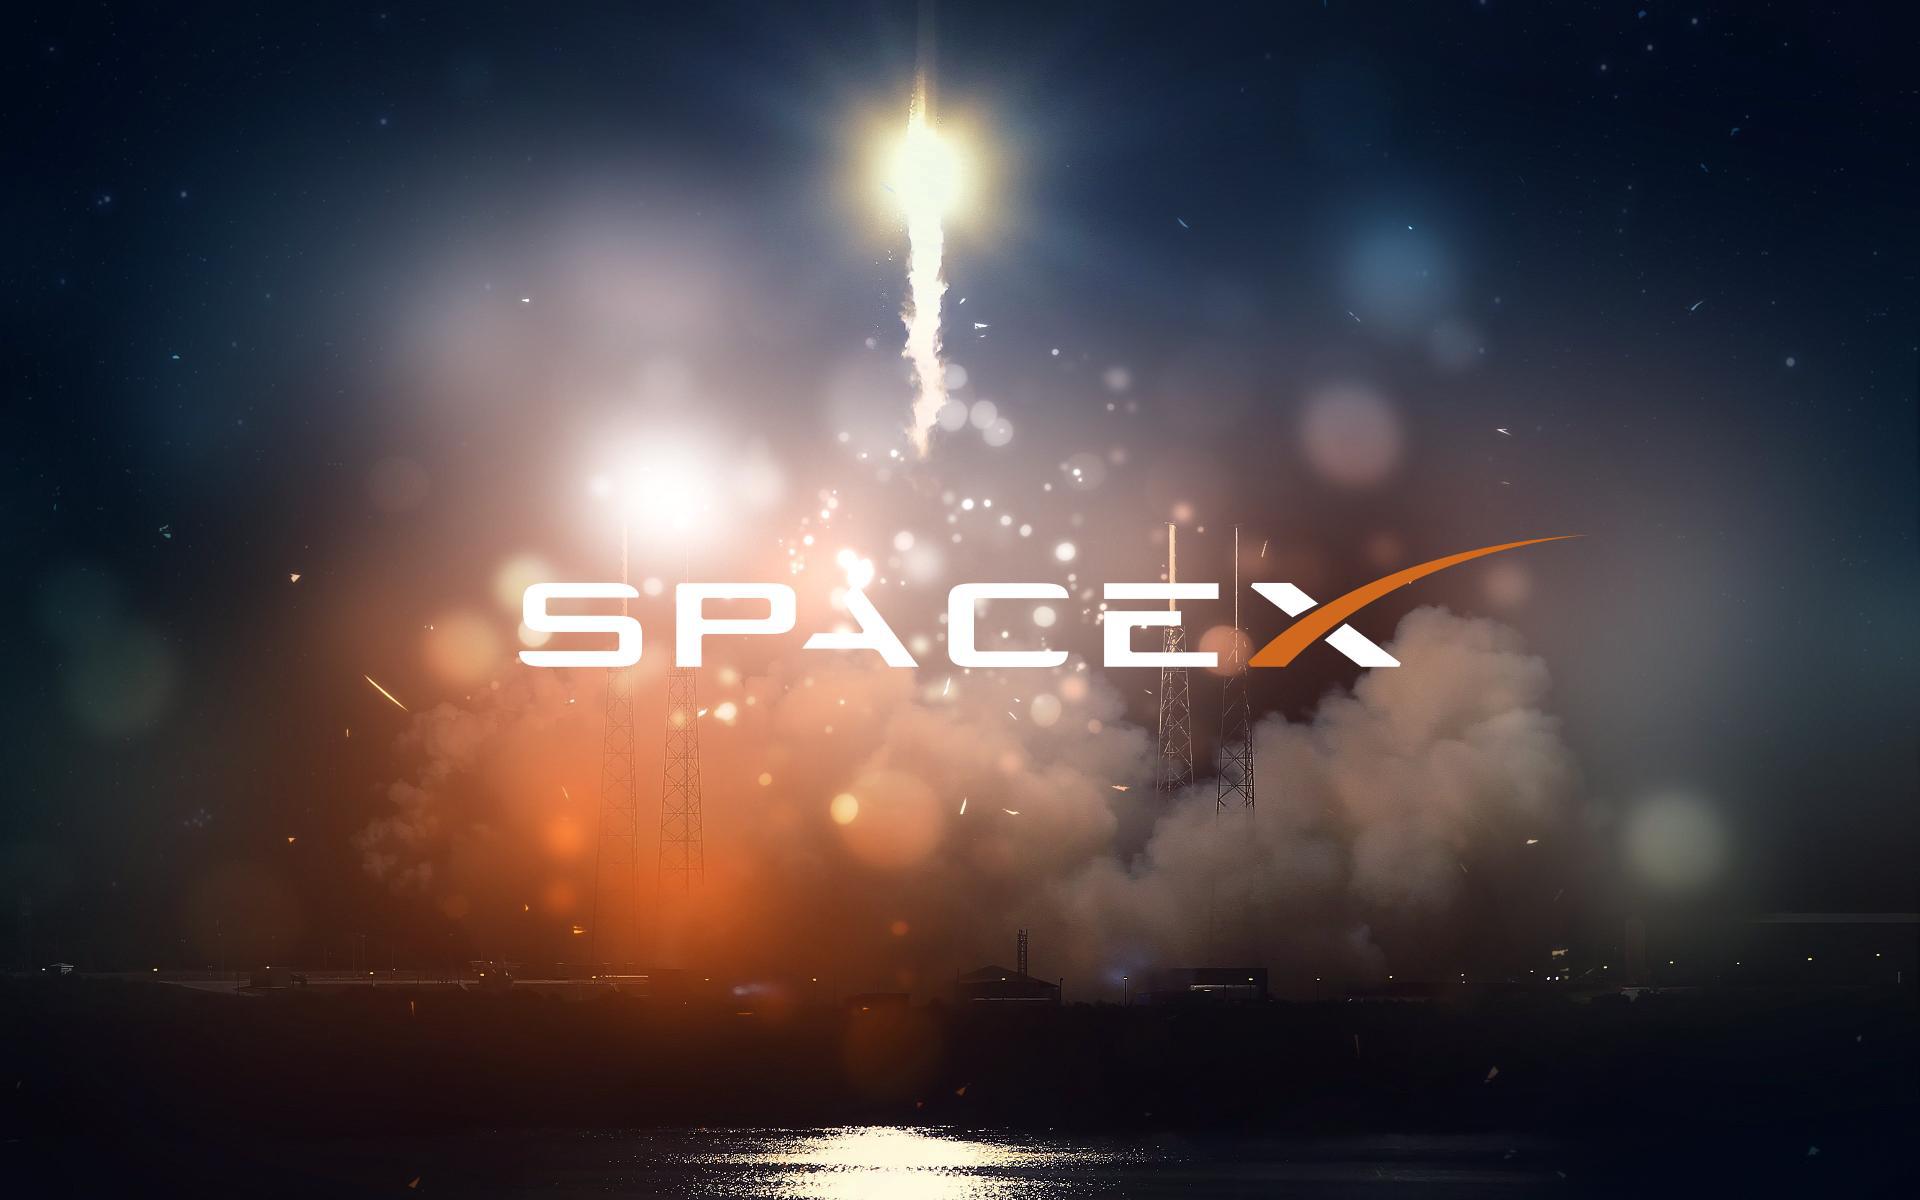 Best Of 1080p Spacex Hd Wallpaper Photos